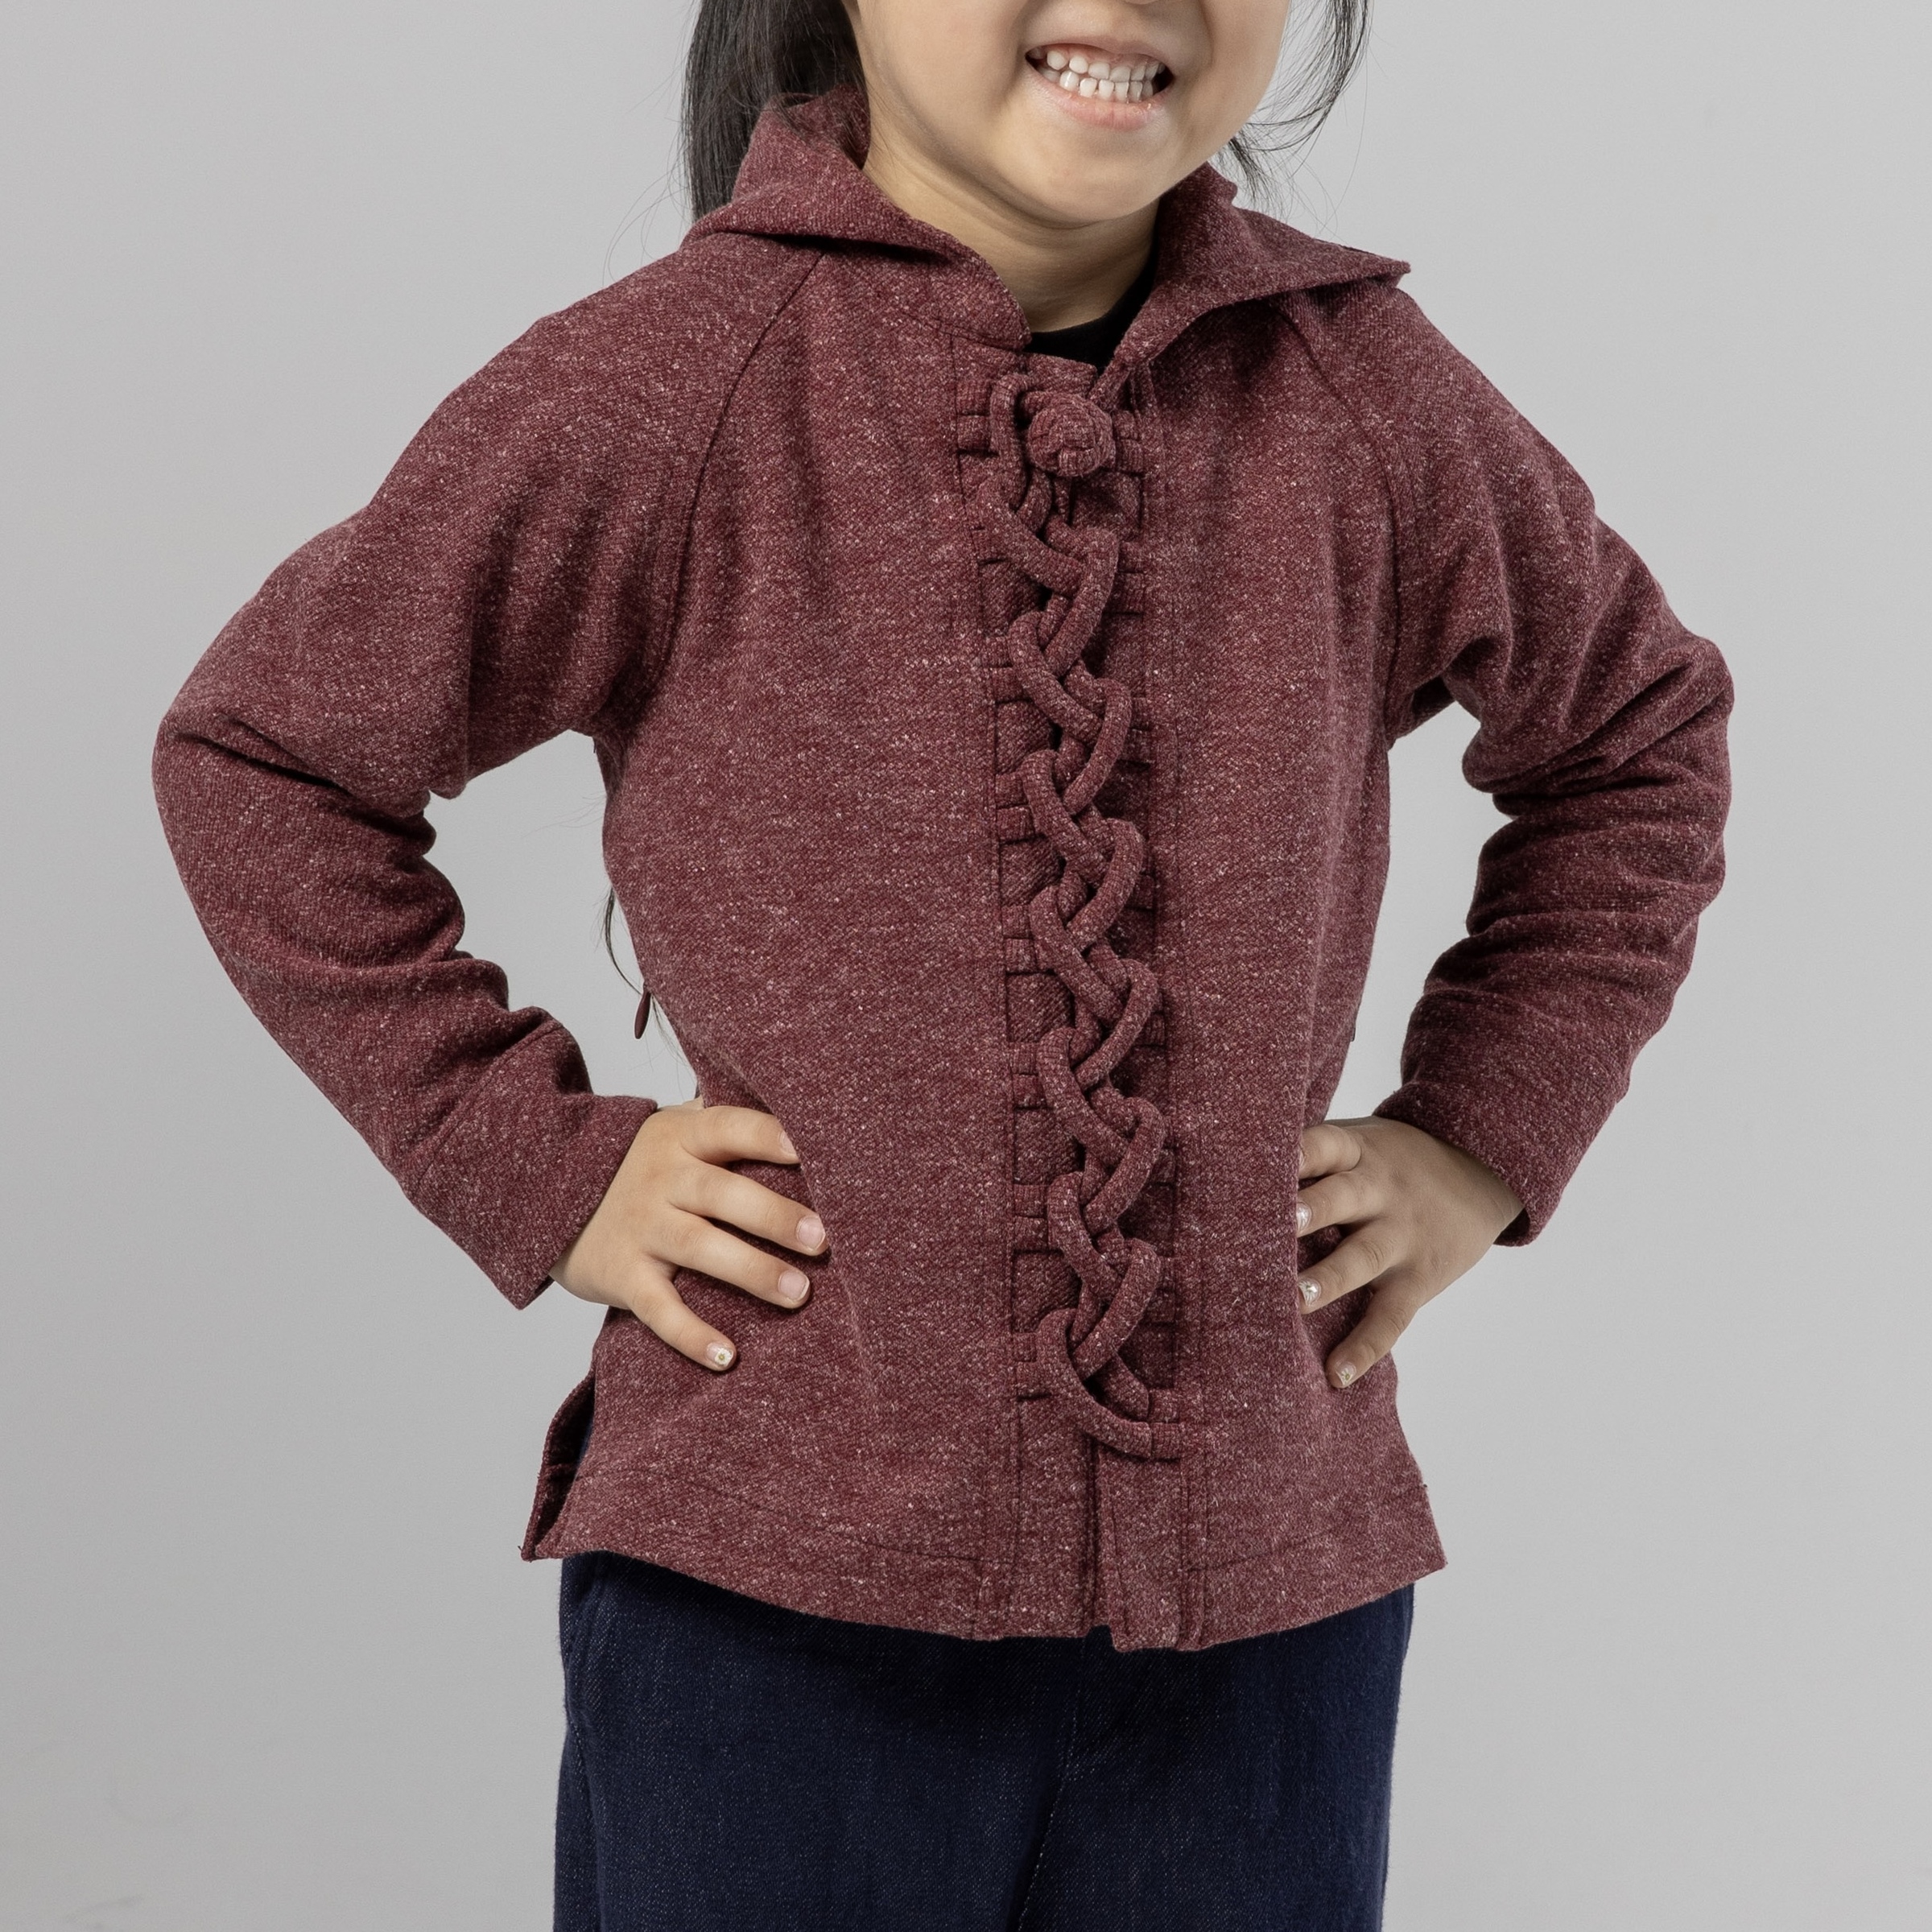 for the cutest Thorough (Bourgogne Design FBK – Hoodie Loops Red） kids] 